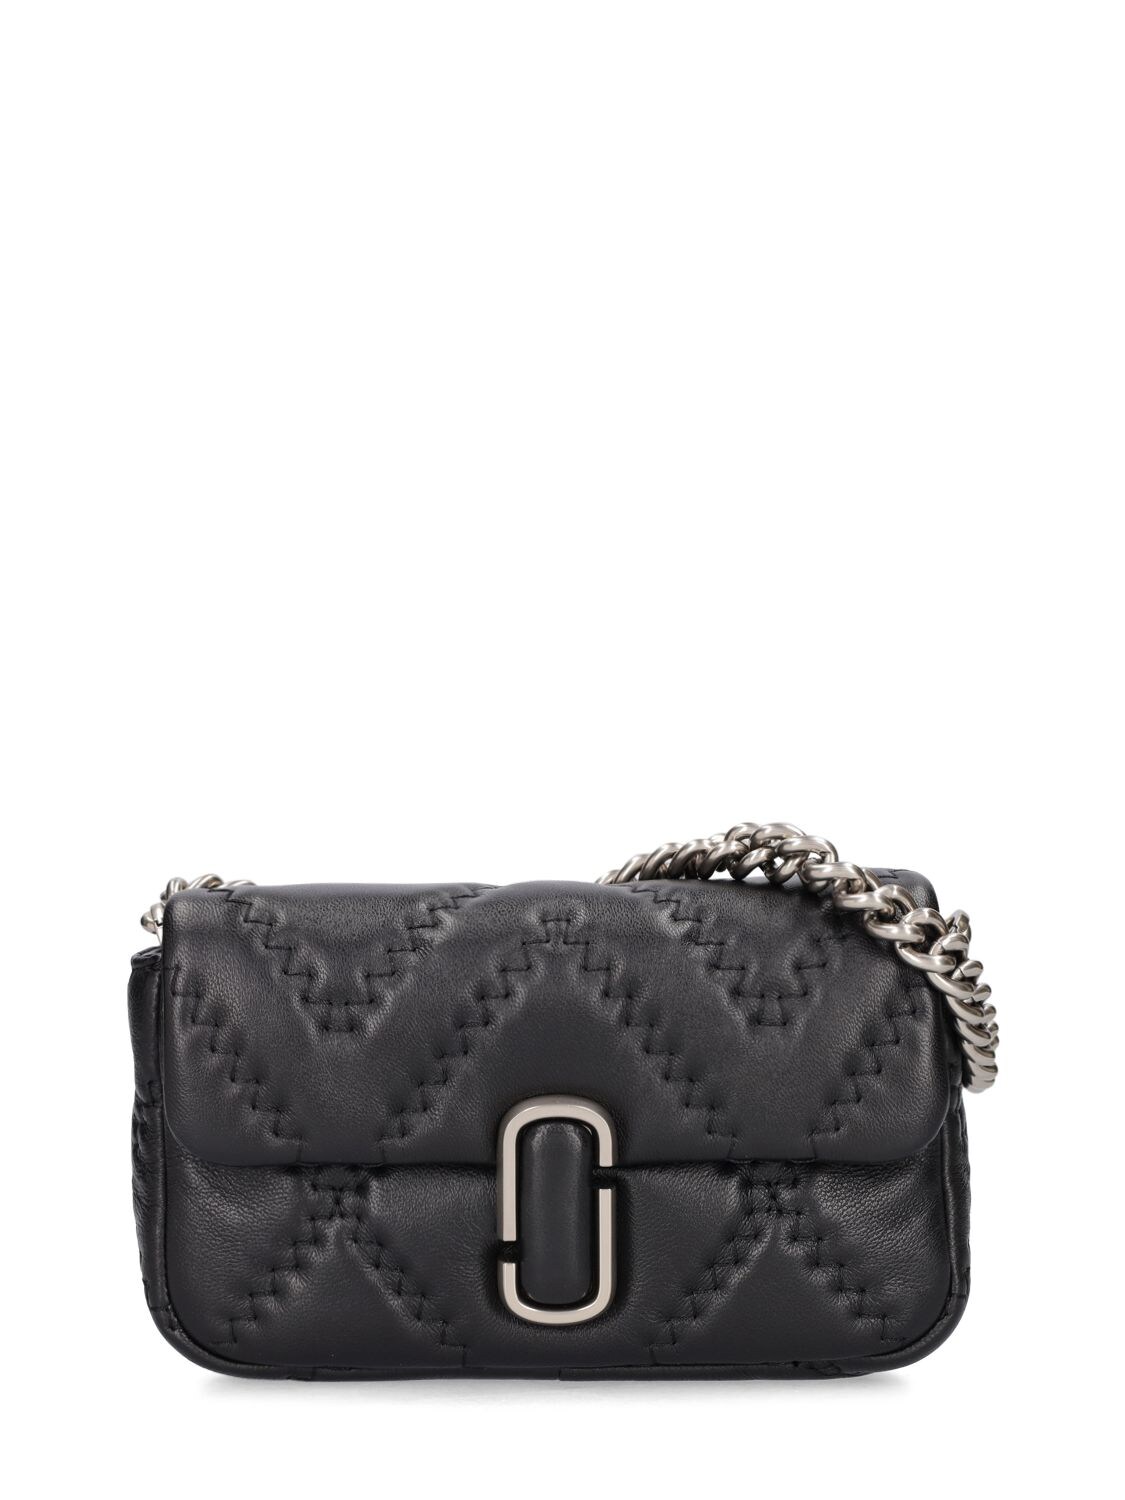 MARC JACOBS THE MINI J MARC QUILTED LEATHER BAG